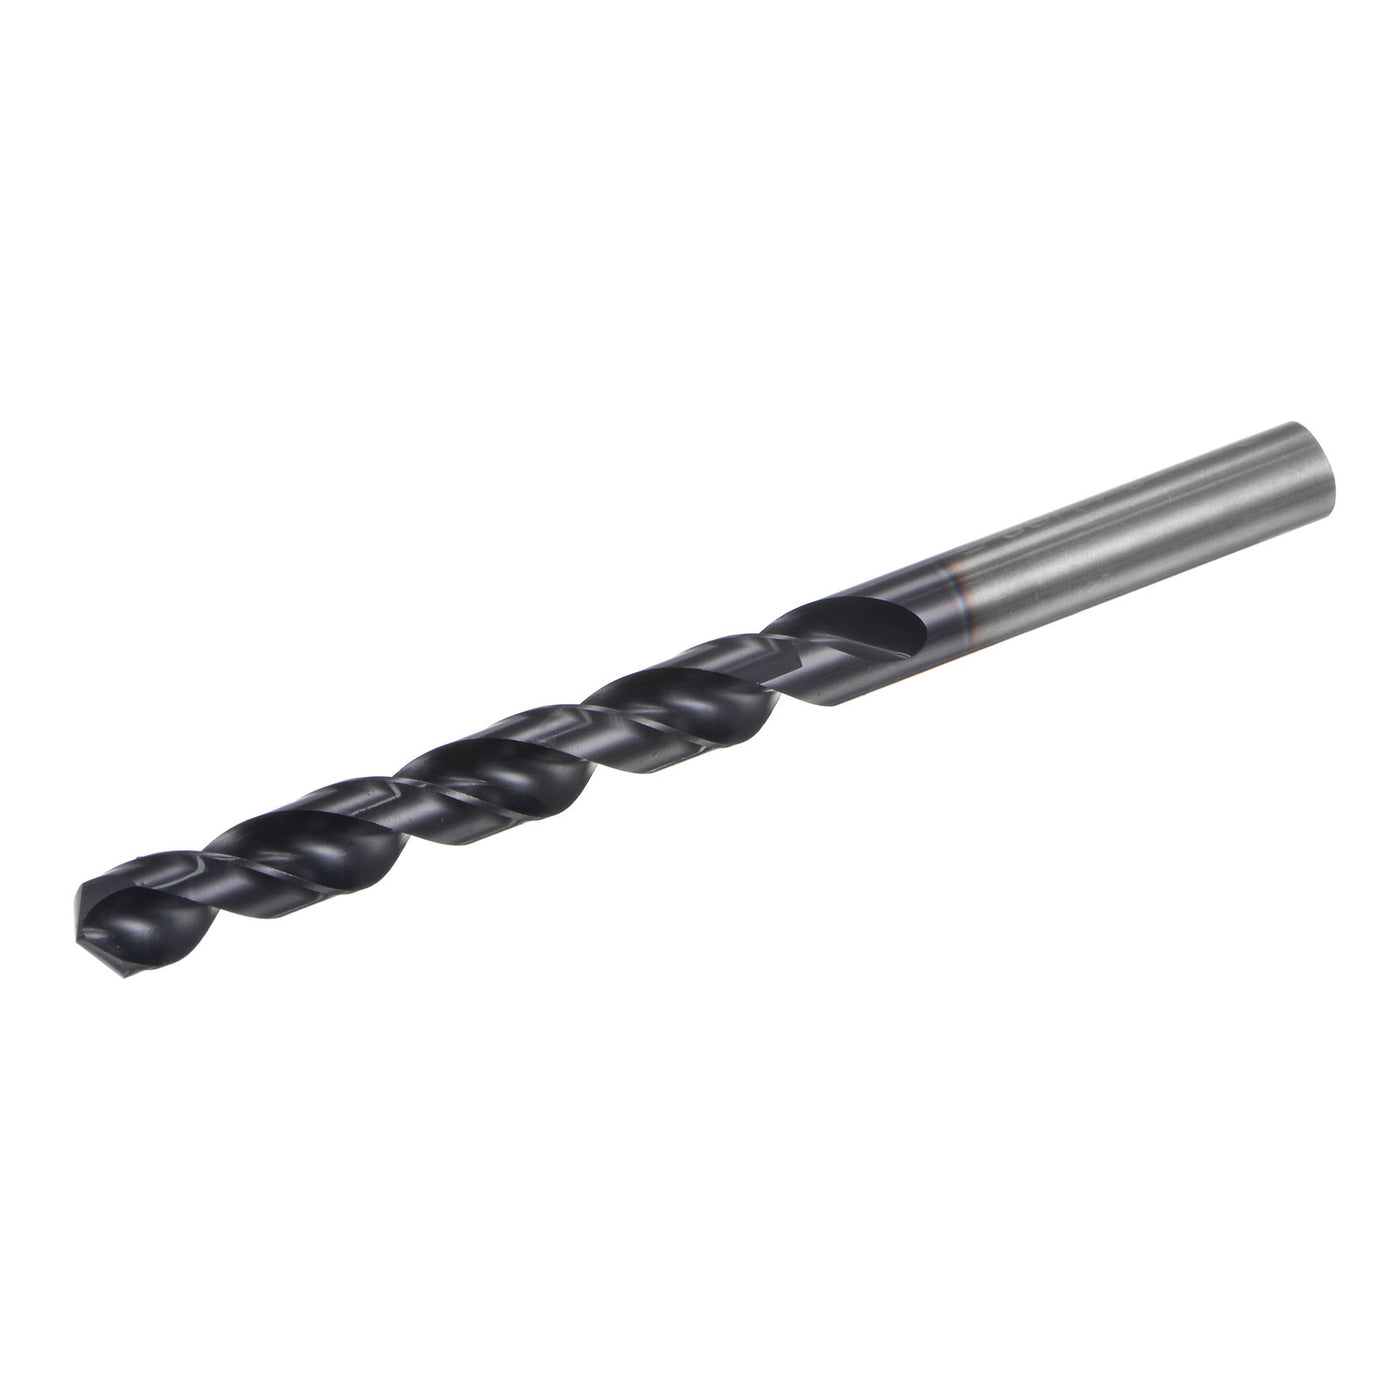 uxcell Uxcell 9.4mm M42 High Speed Steel Twist Drill Bits, TiCN Coated Round Shank Drill Bit